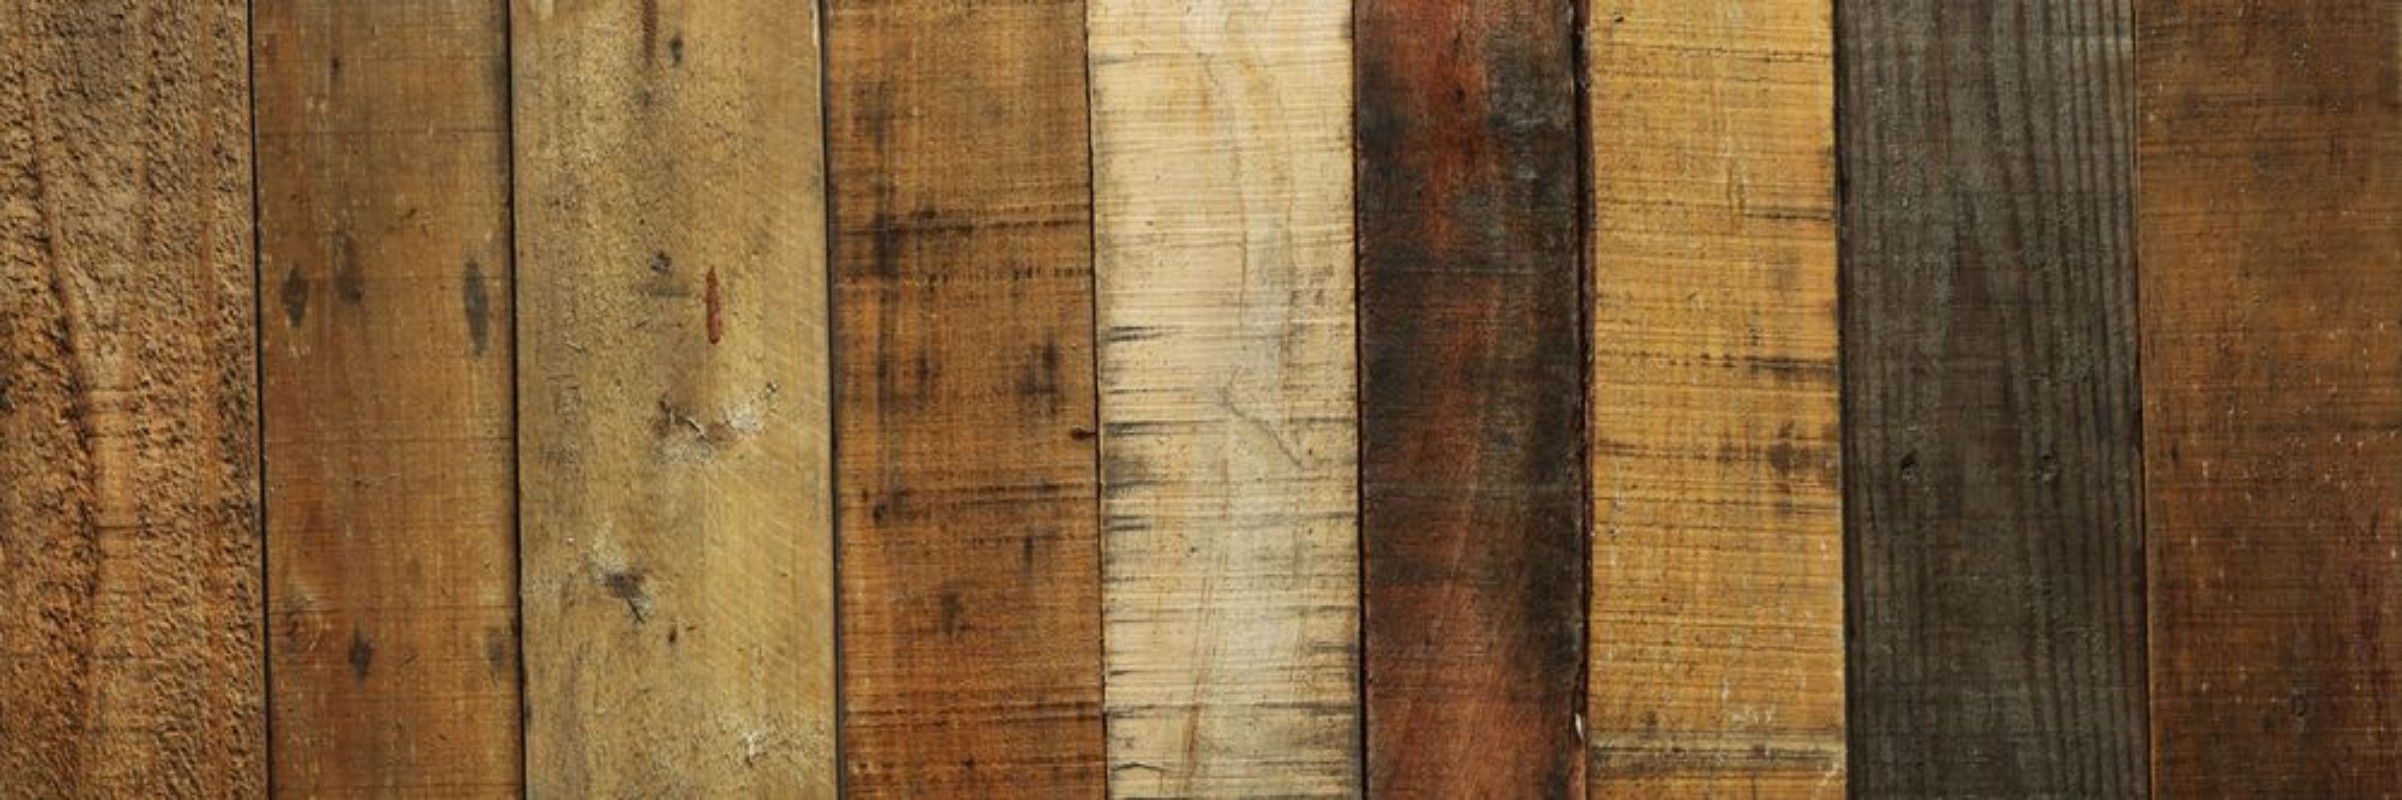 Image de Old worn out wooden boards background